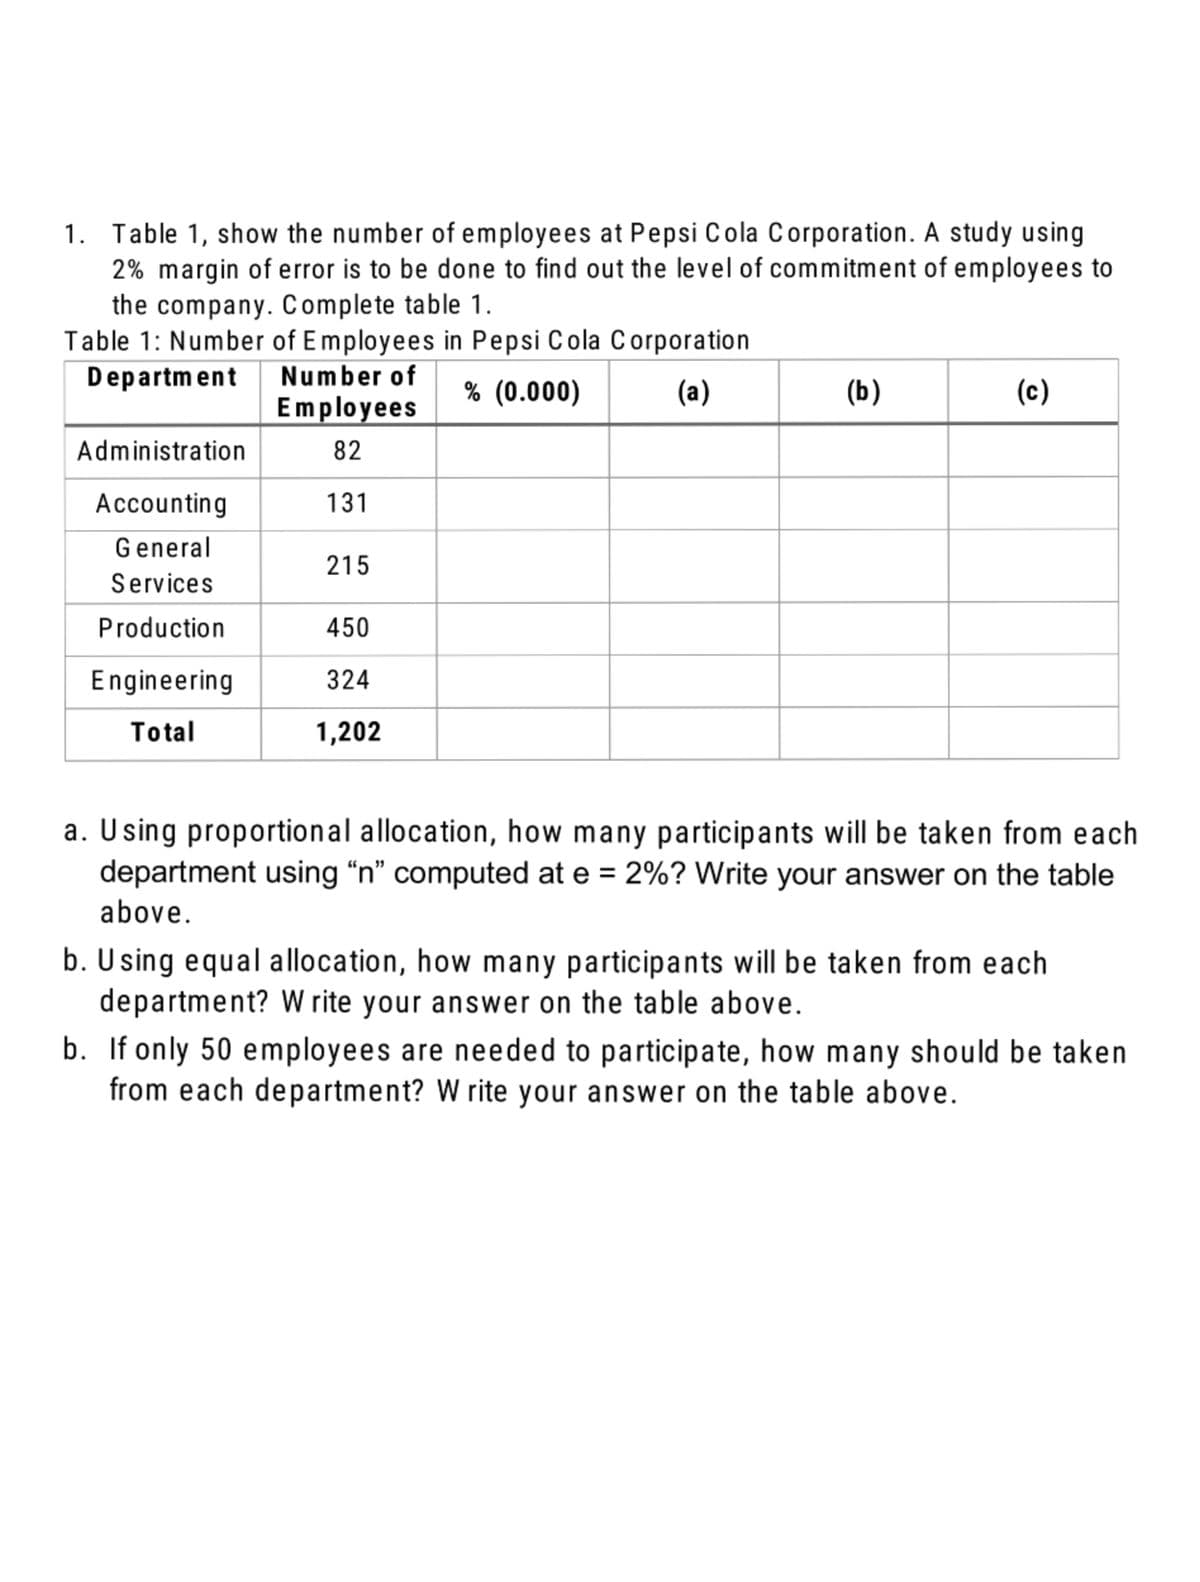 1. Table 1, show the number of employees at Pepsi Cola Corporation. A study using
2% margin of error is to be done to find out the level of commitment of employees to
the company. Complete table 1.
Table 1: Number of Employees in Pepsi Cola Corporation
Department
Number of
% (0.000)
(a)
(b)
(c)
Employees
Administration
82
Accounting
131
General
215
Services
Production
450
Engineering
324
Total
1,202
a. Using proportional allocation, how many participants will be taken from each
department using “n" computed at e = 2%? Write your answer on the table
above.
b. Using equal allocation, how many participants will be taken from each
department? W rite your answer on the table above.
b. If only 50 employees are needed to participate, how many should be taken
from each department? W rite your answer on the table above.
